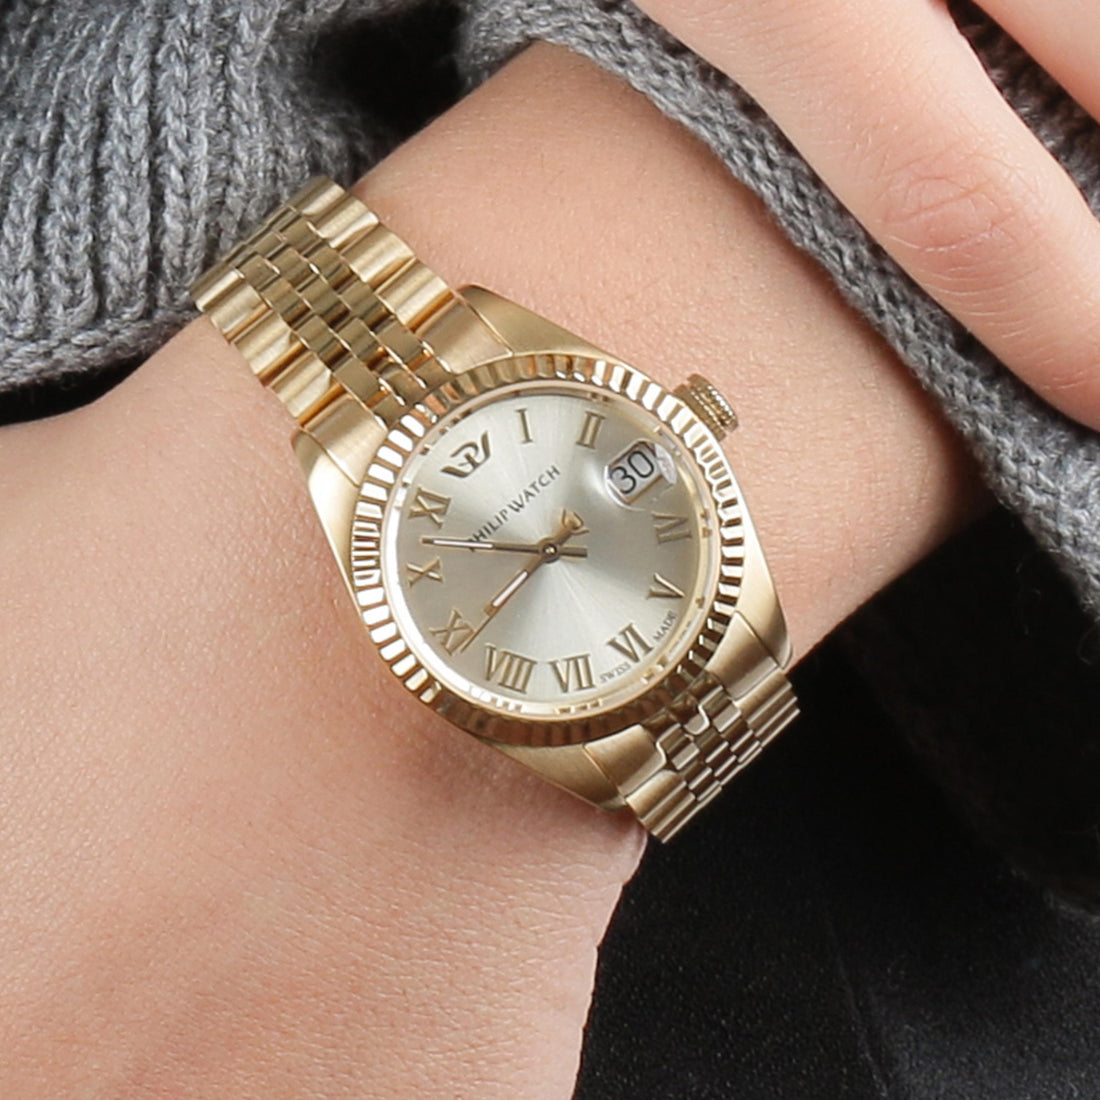 Philip Watch - Caribe Champagne Dial 31mm Women&